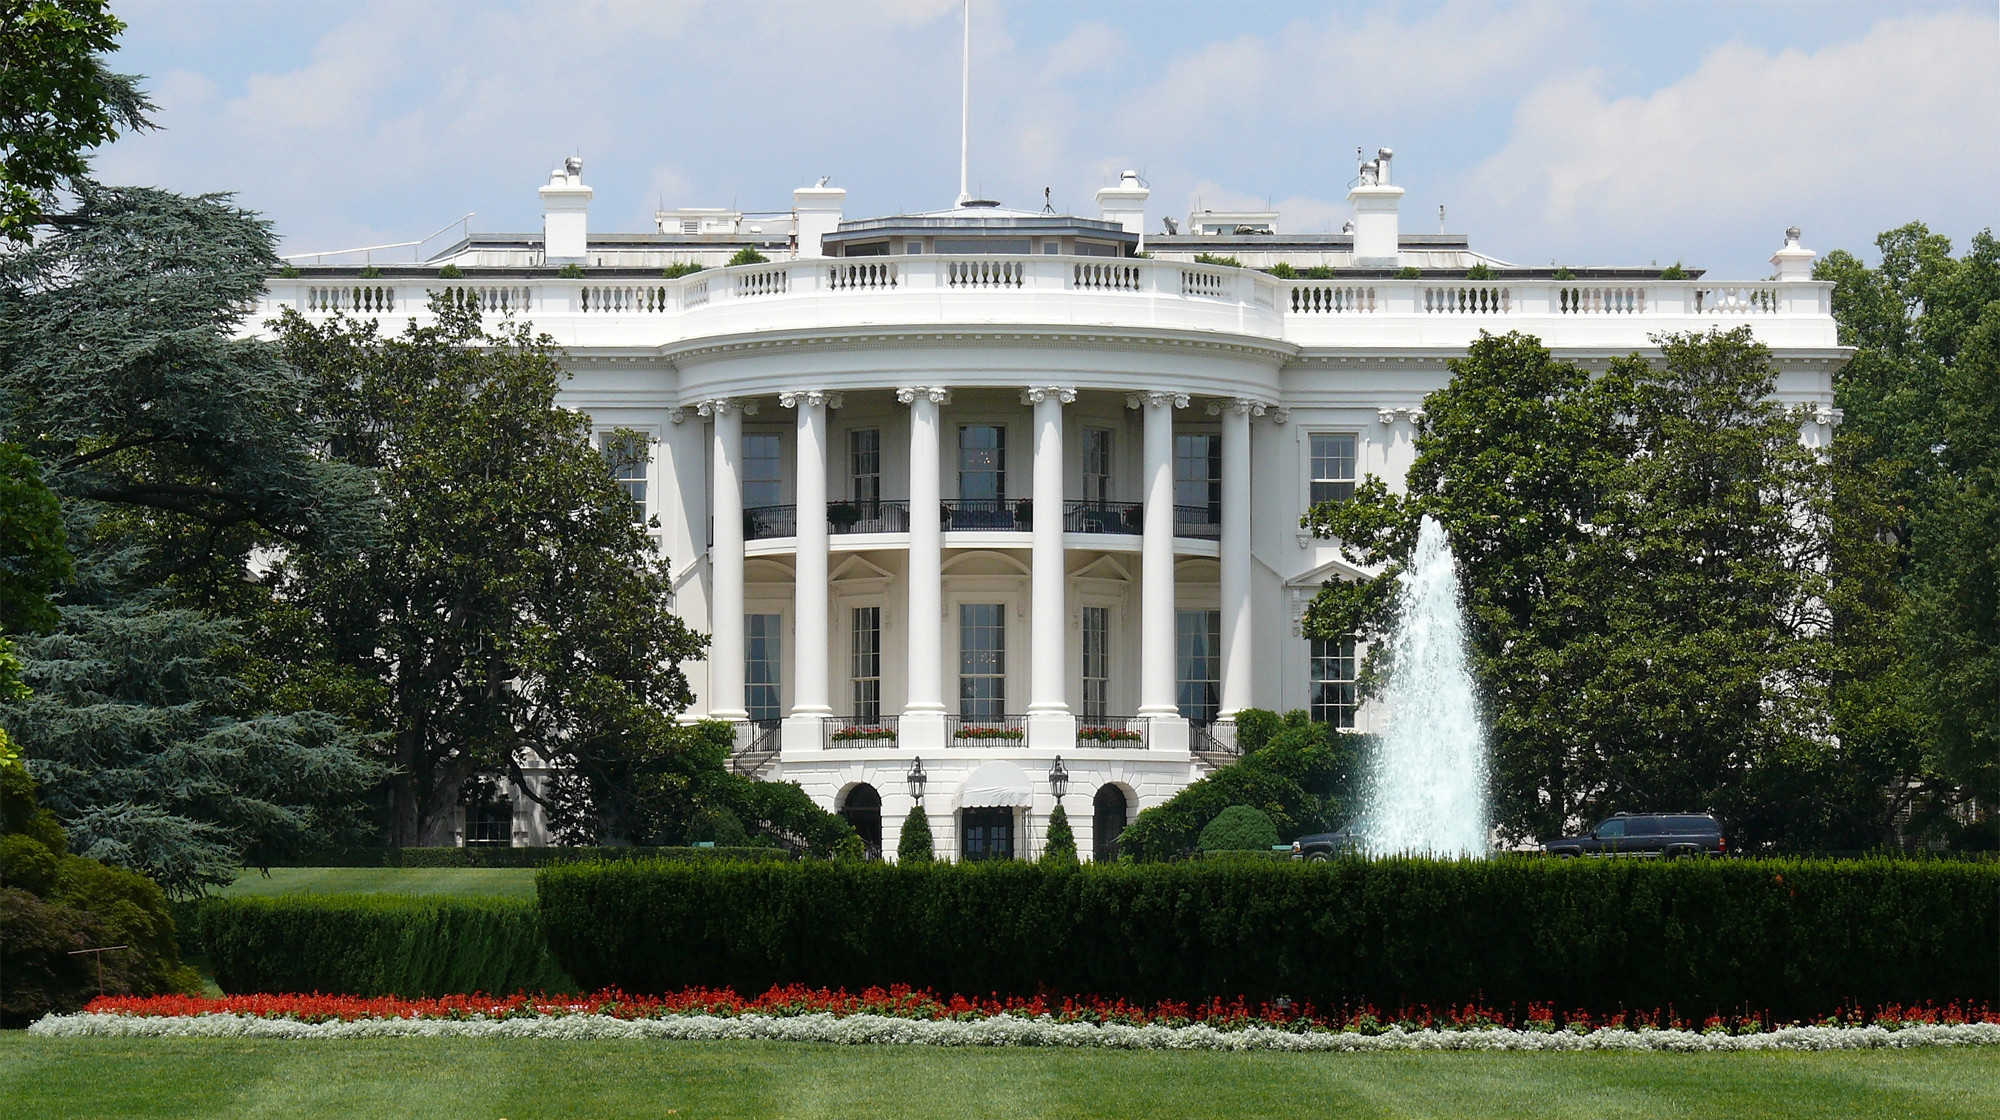 White House file photo, adapted from image at .gov source